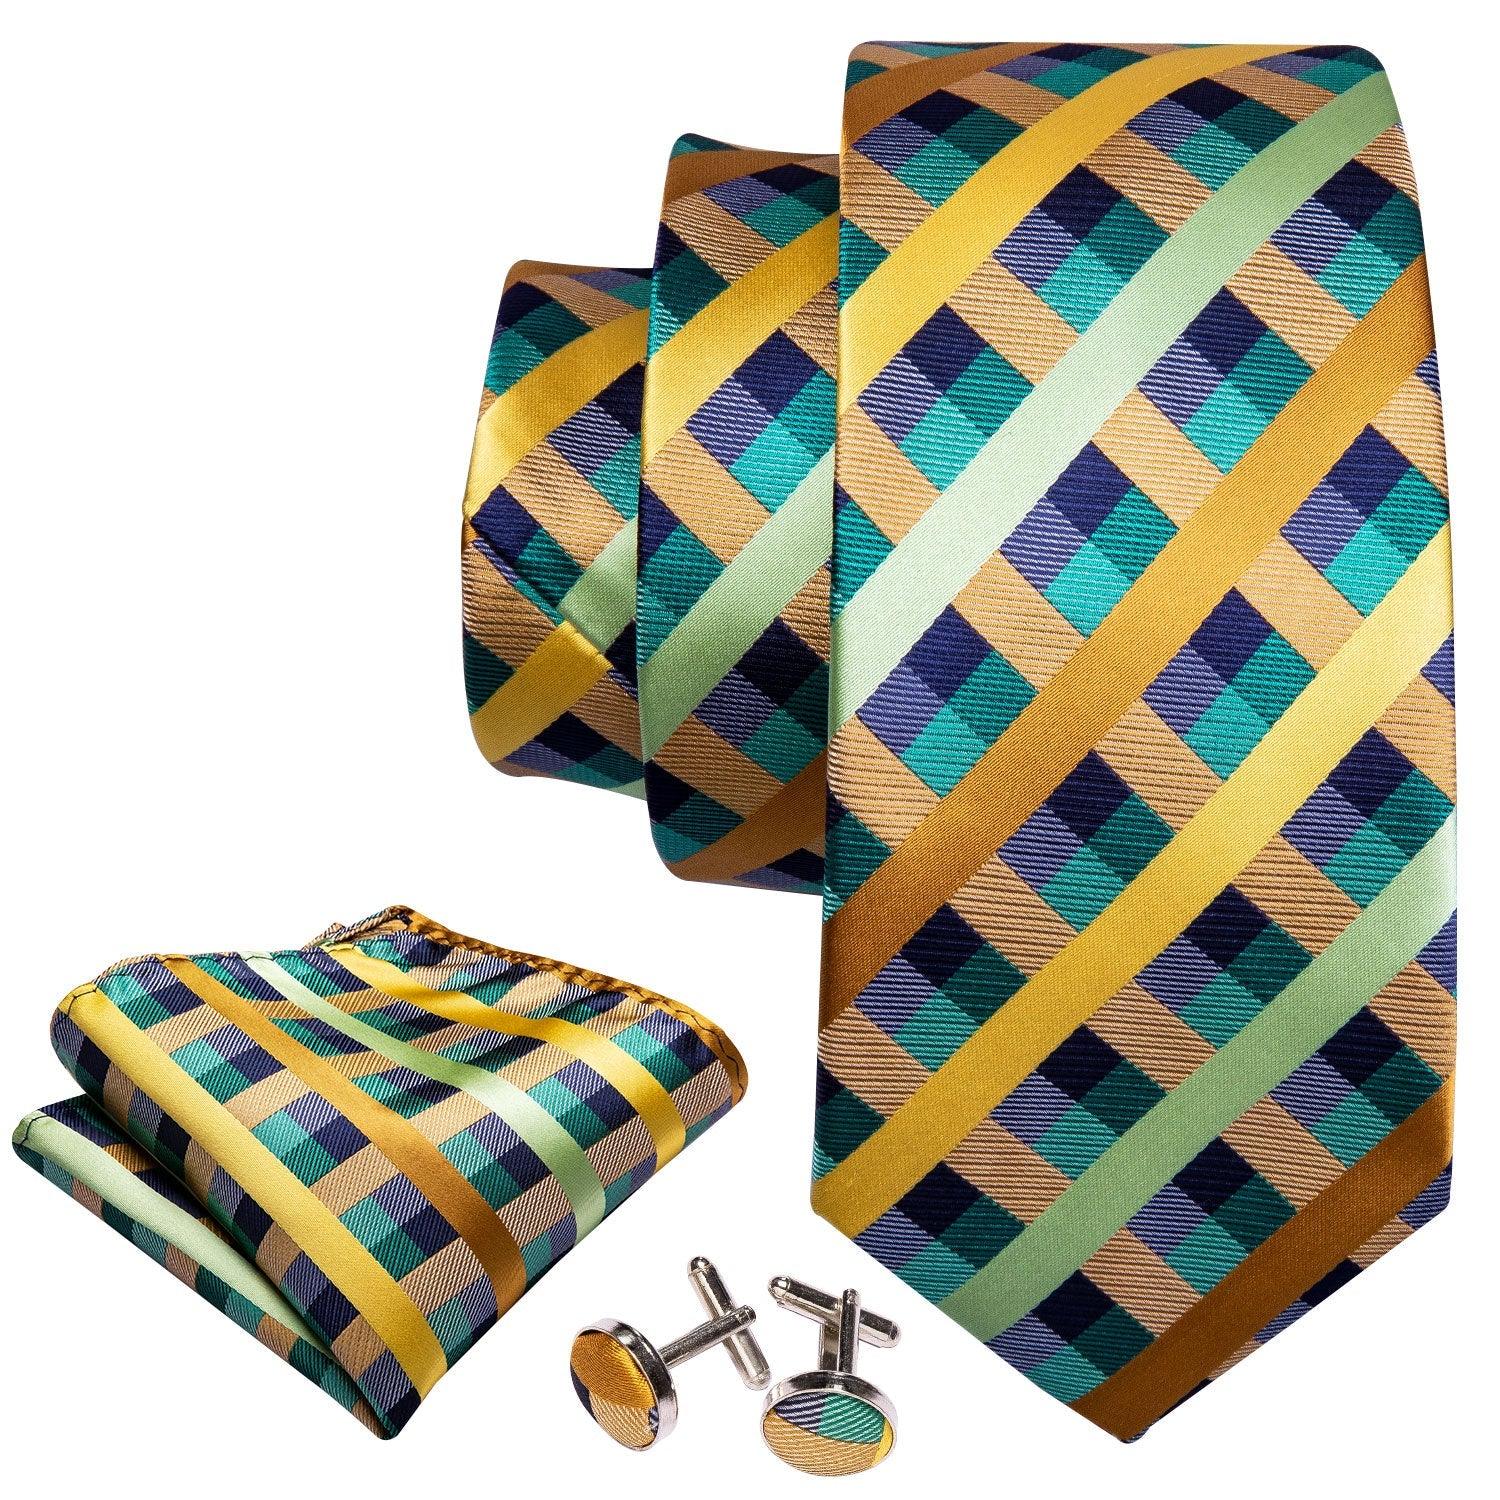 Green Yellow Plaid Silk Tie Crystal Brooches Pocket Square Cufflinks Set - STYLETIE